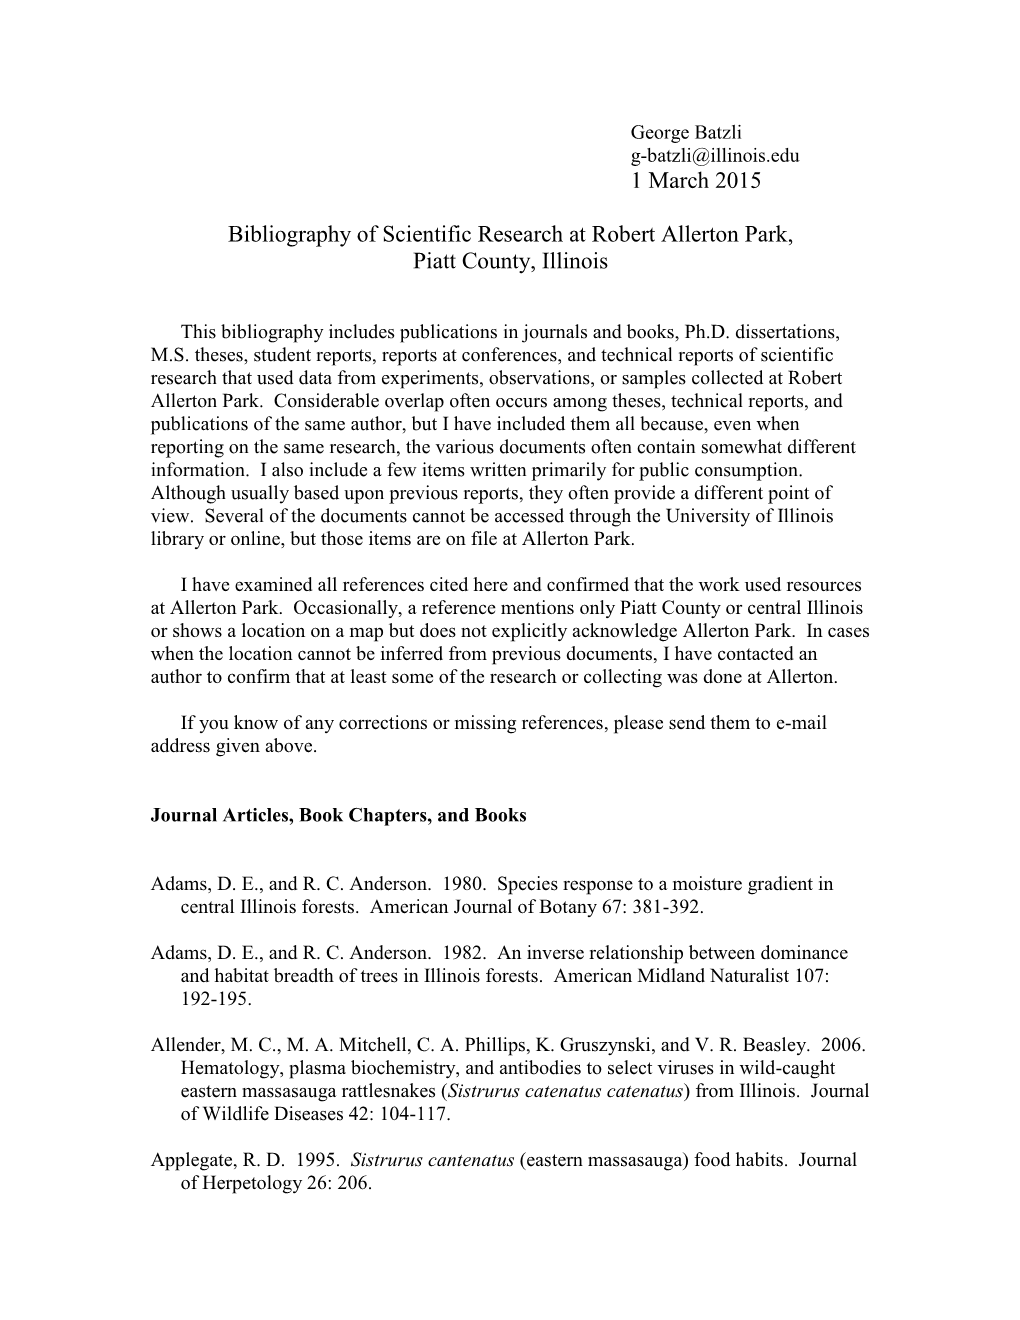 1 March 2015 Bibliography of Scientific Research at Robert